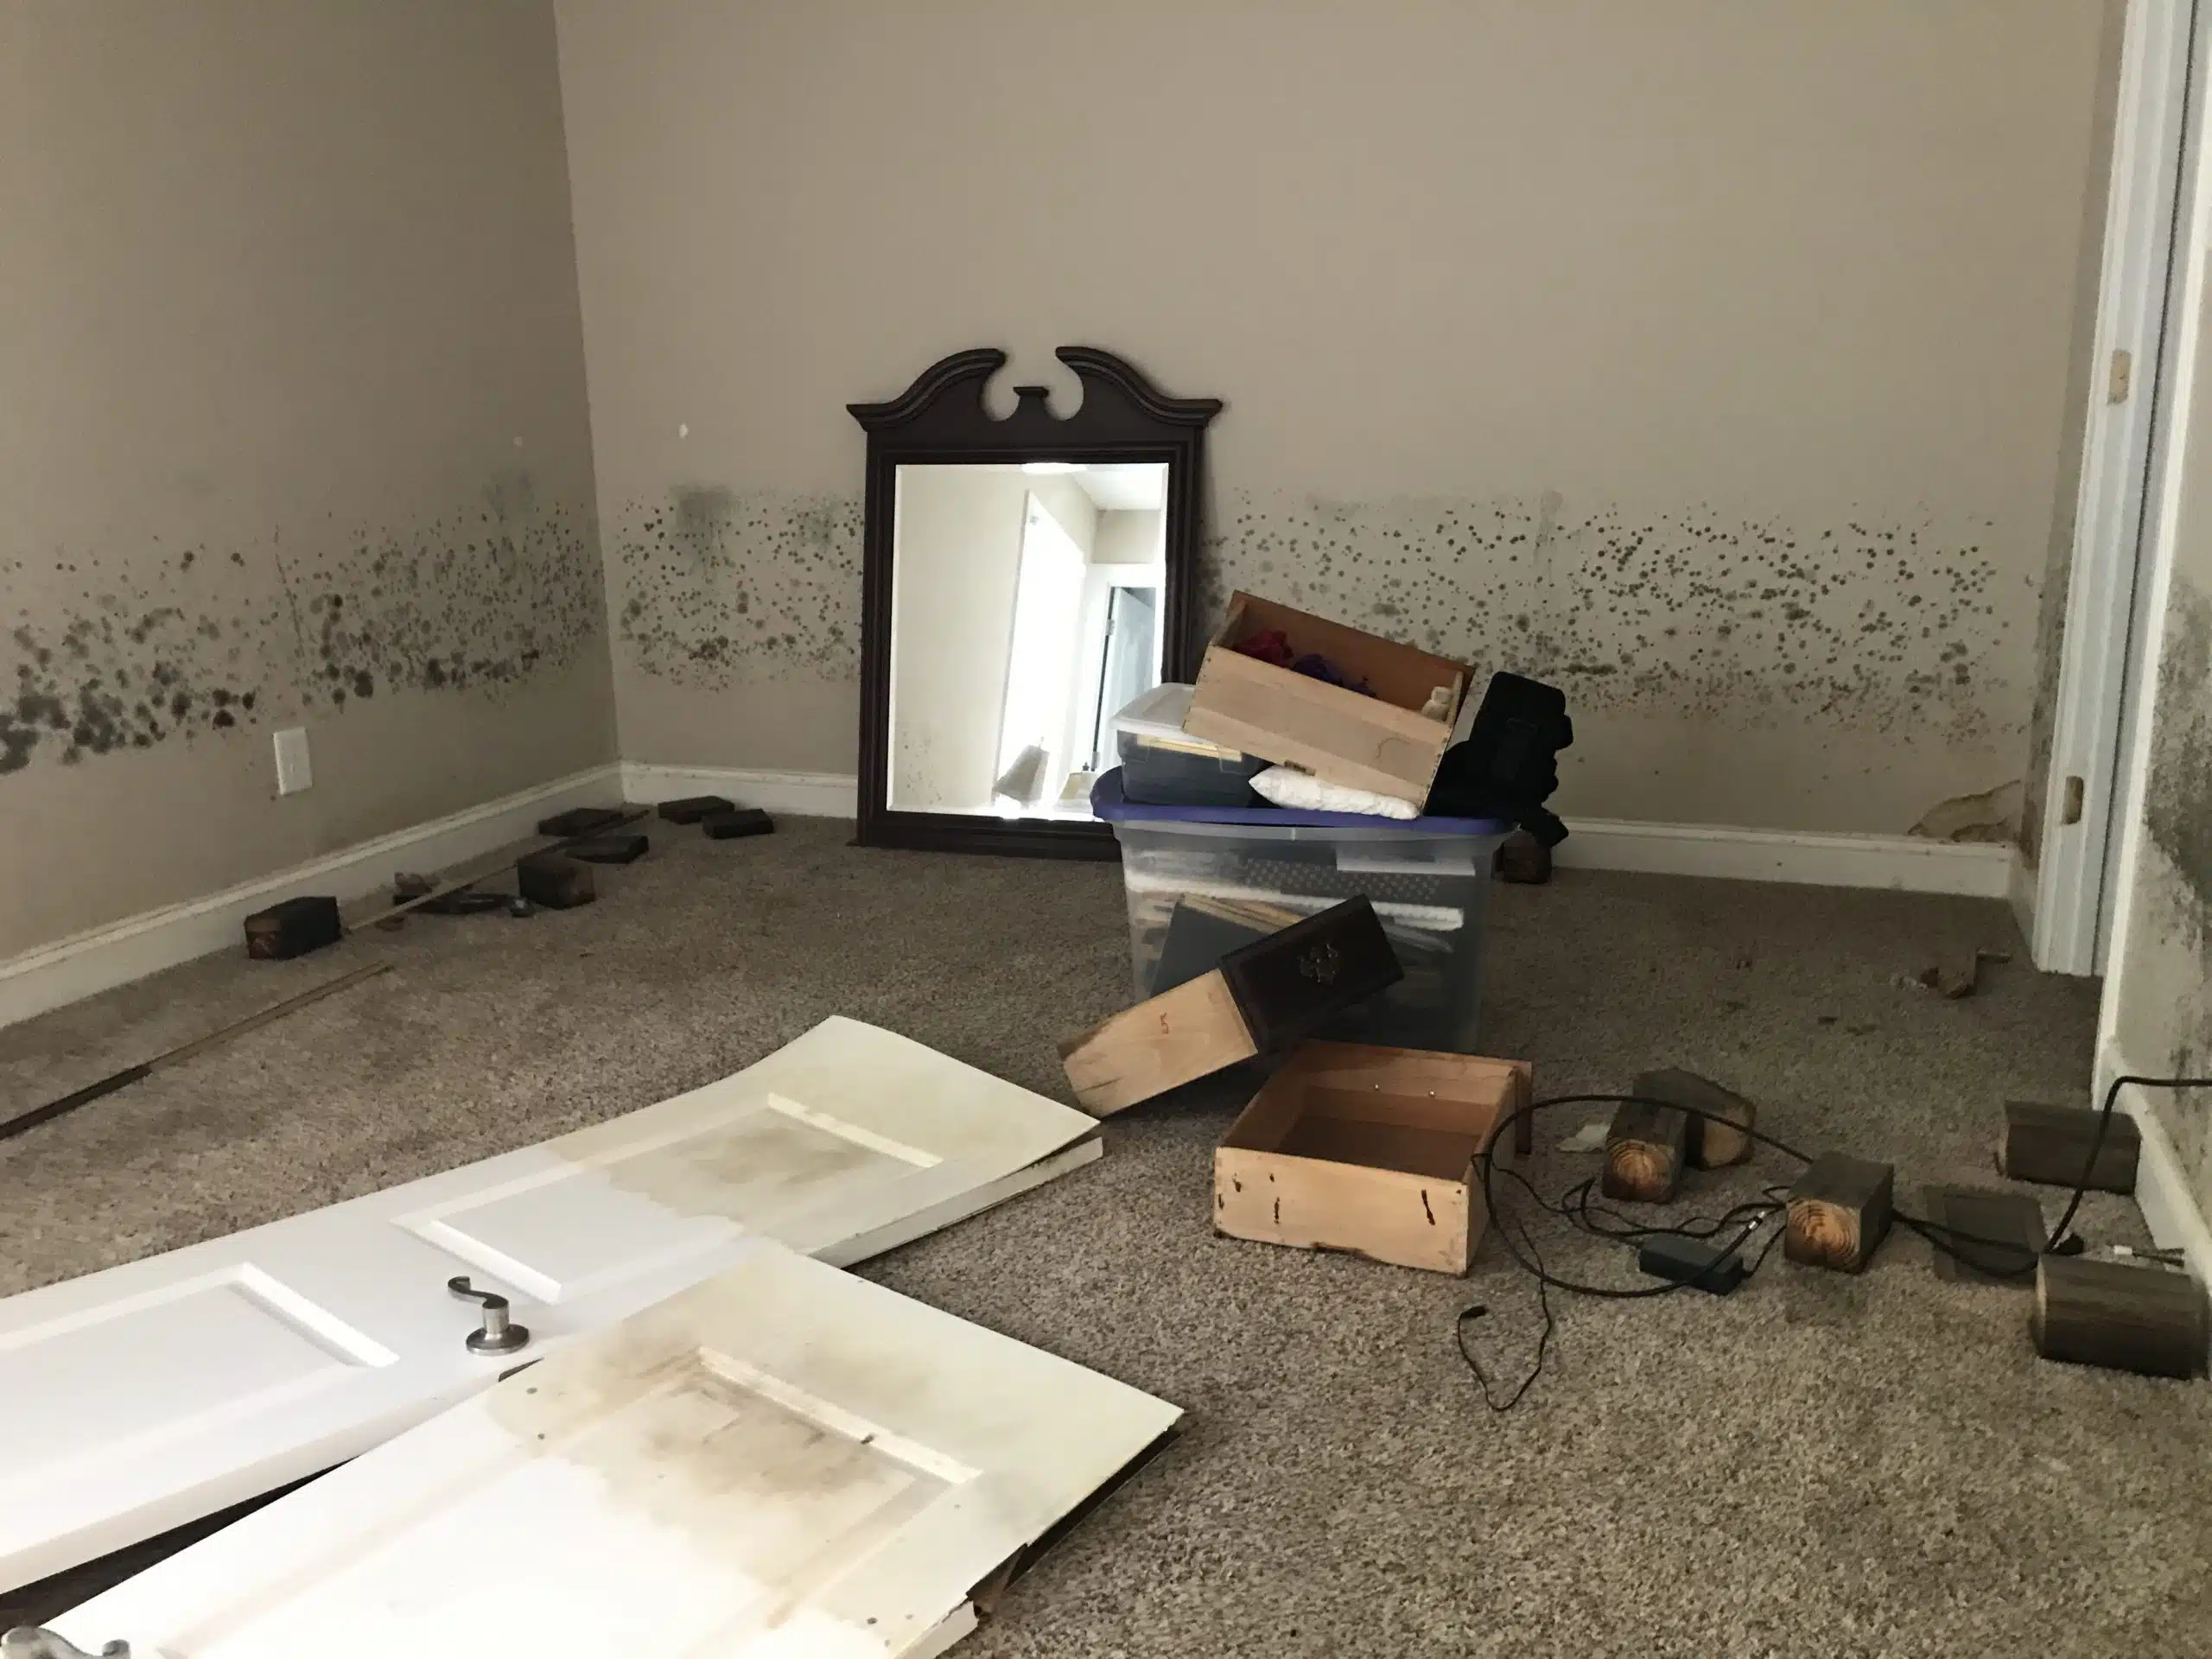 How to Win a Mold Damage Case?